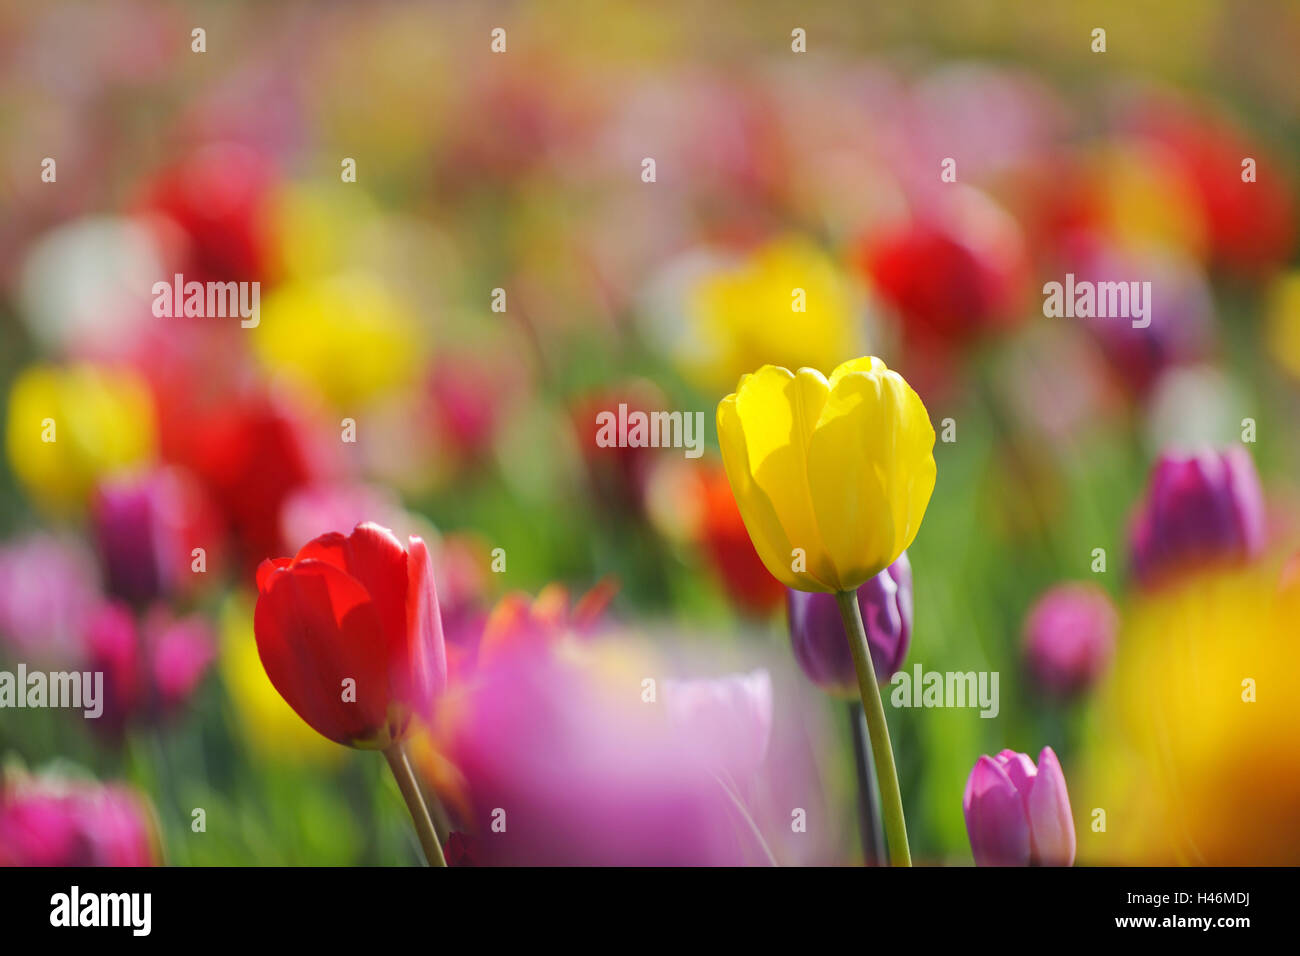 Tulips, colours, passed away, flowers, spring flowers, blossoms, differently, spring, yellow, red, mauve, pink, brightly, medium close-up, Tulipa, bulb plants, blossom, botany, blossoms, light, flora, garden, lily plant, sunny, Stock Photo